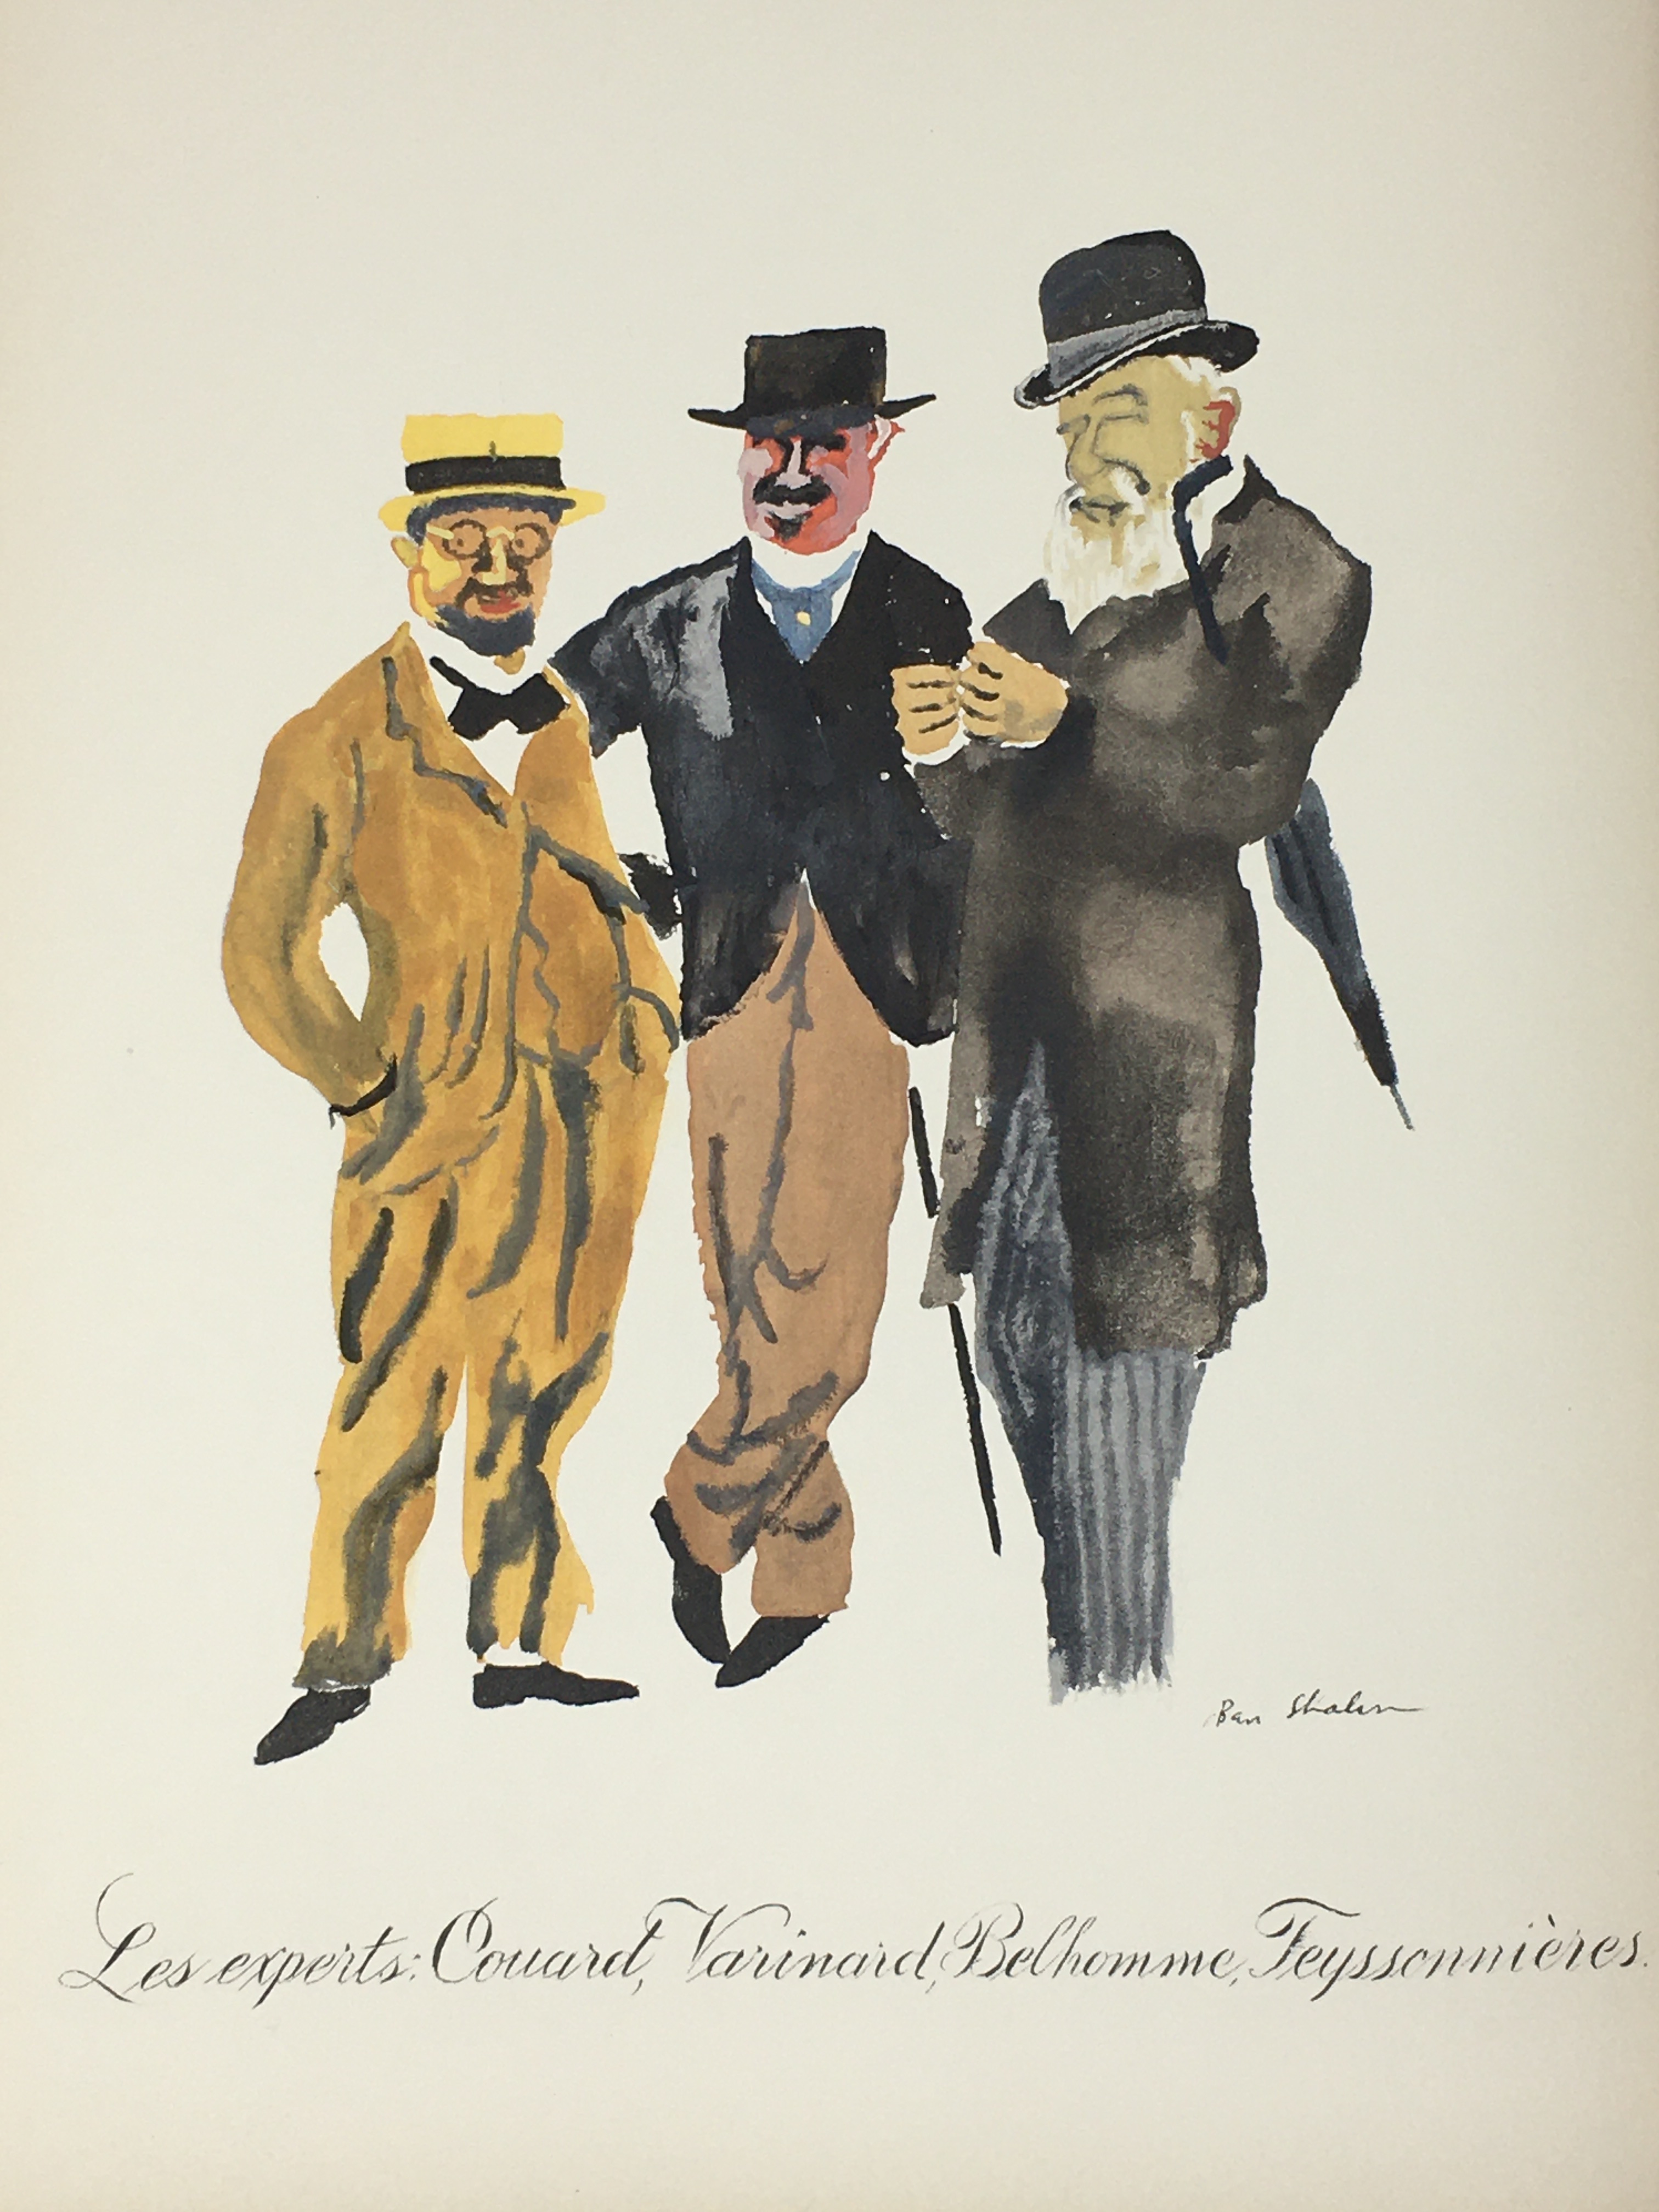 Dreyfus Affair - Book Collection featuring The Ben Shahn Prints (Limited First Edition) - Image 44 of 73